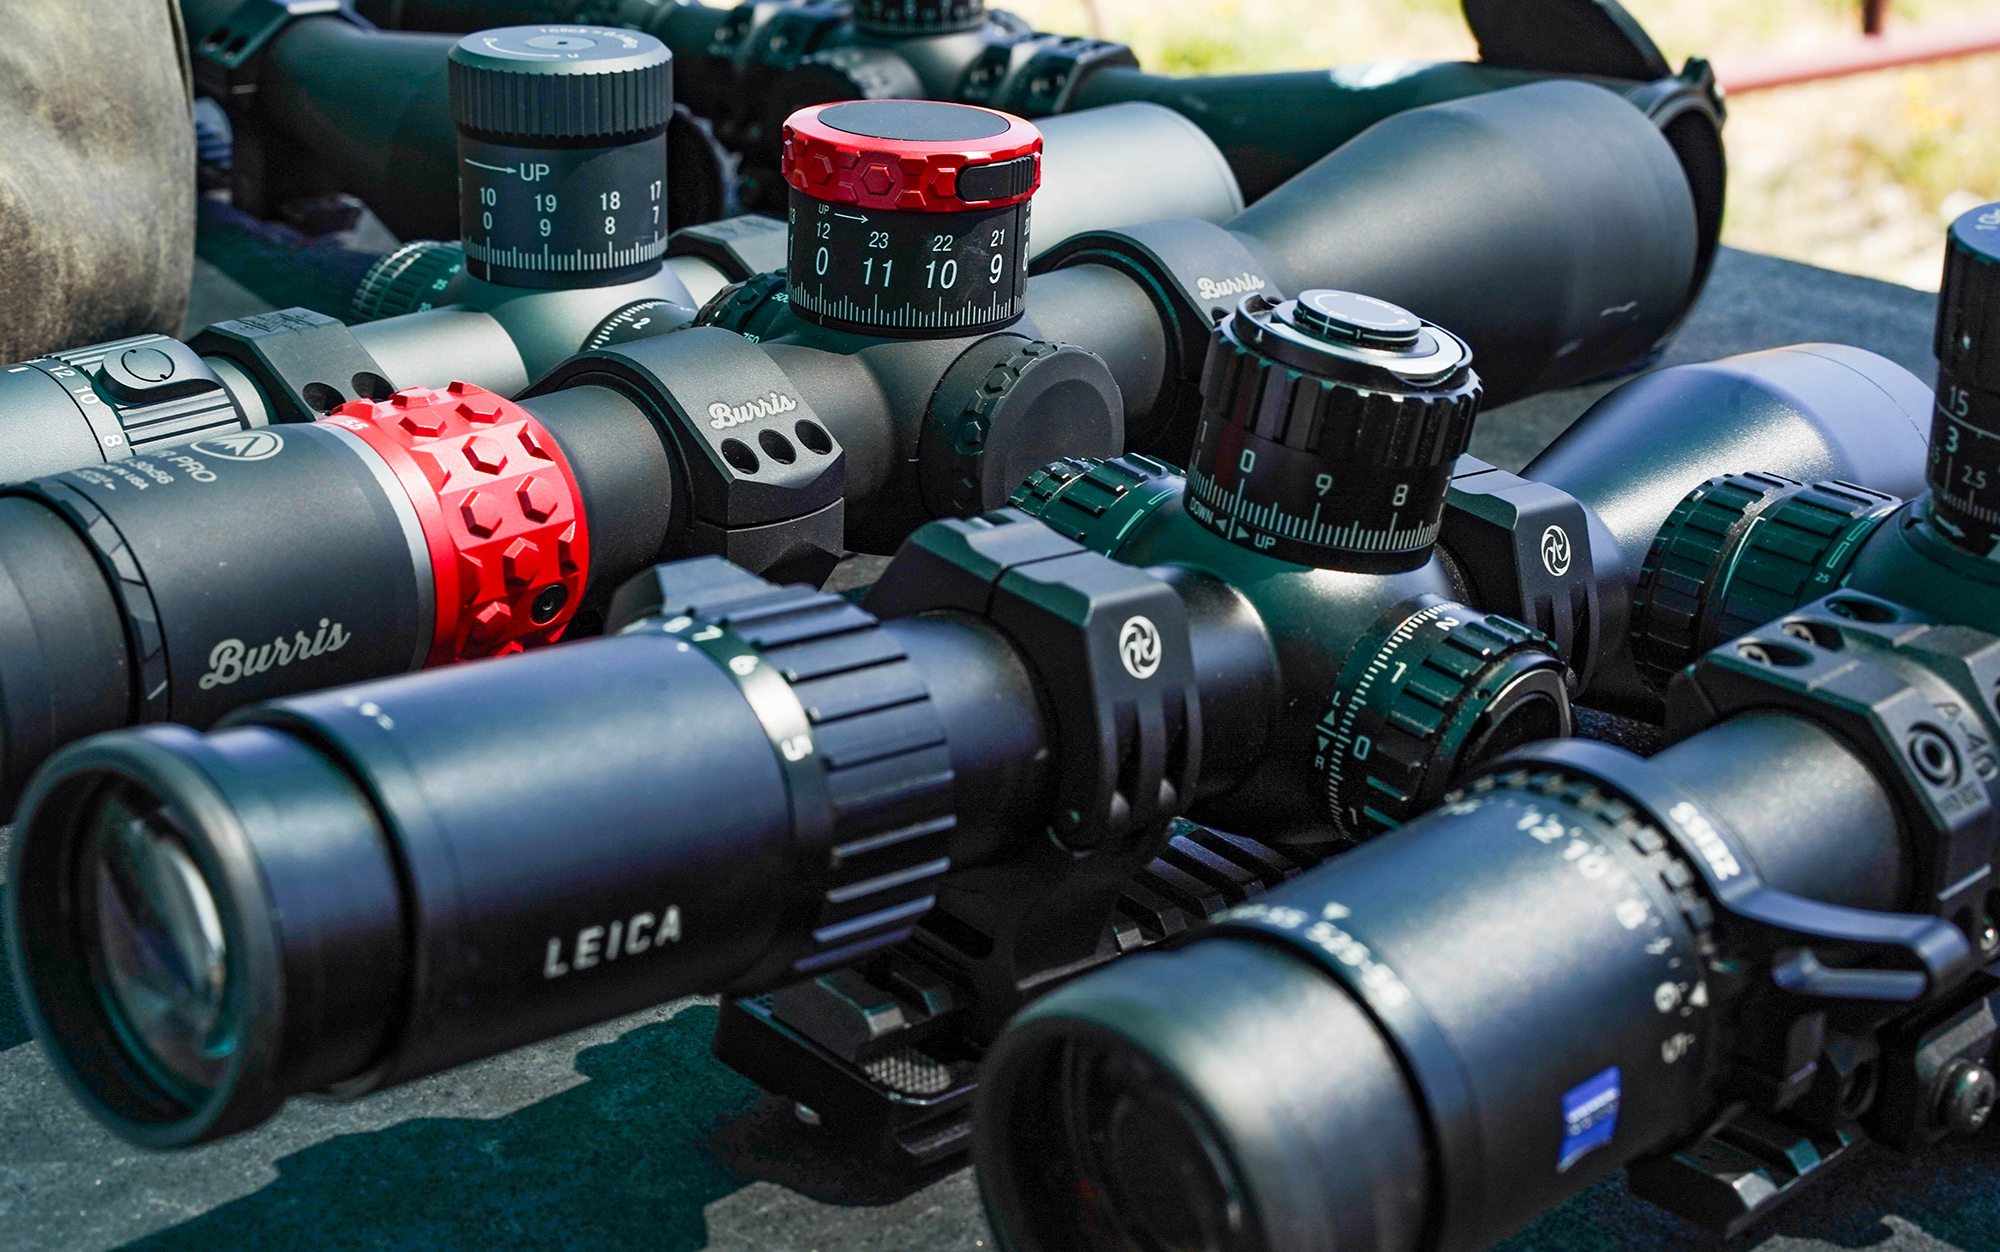 Leica and Burris long range scopes sit in a line.